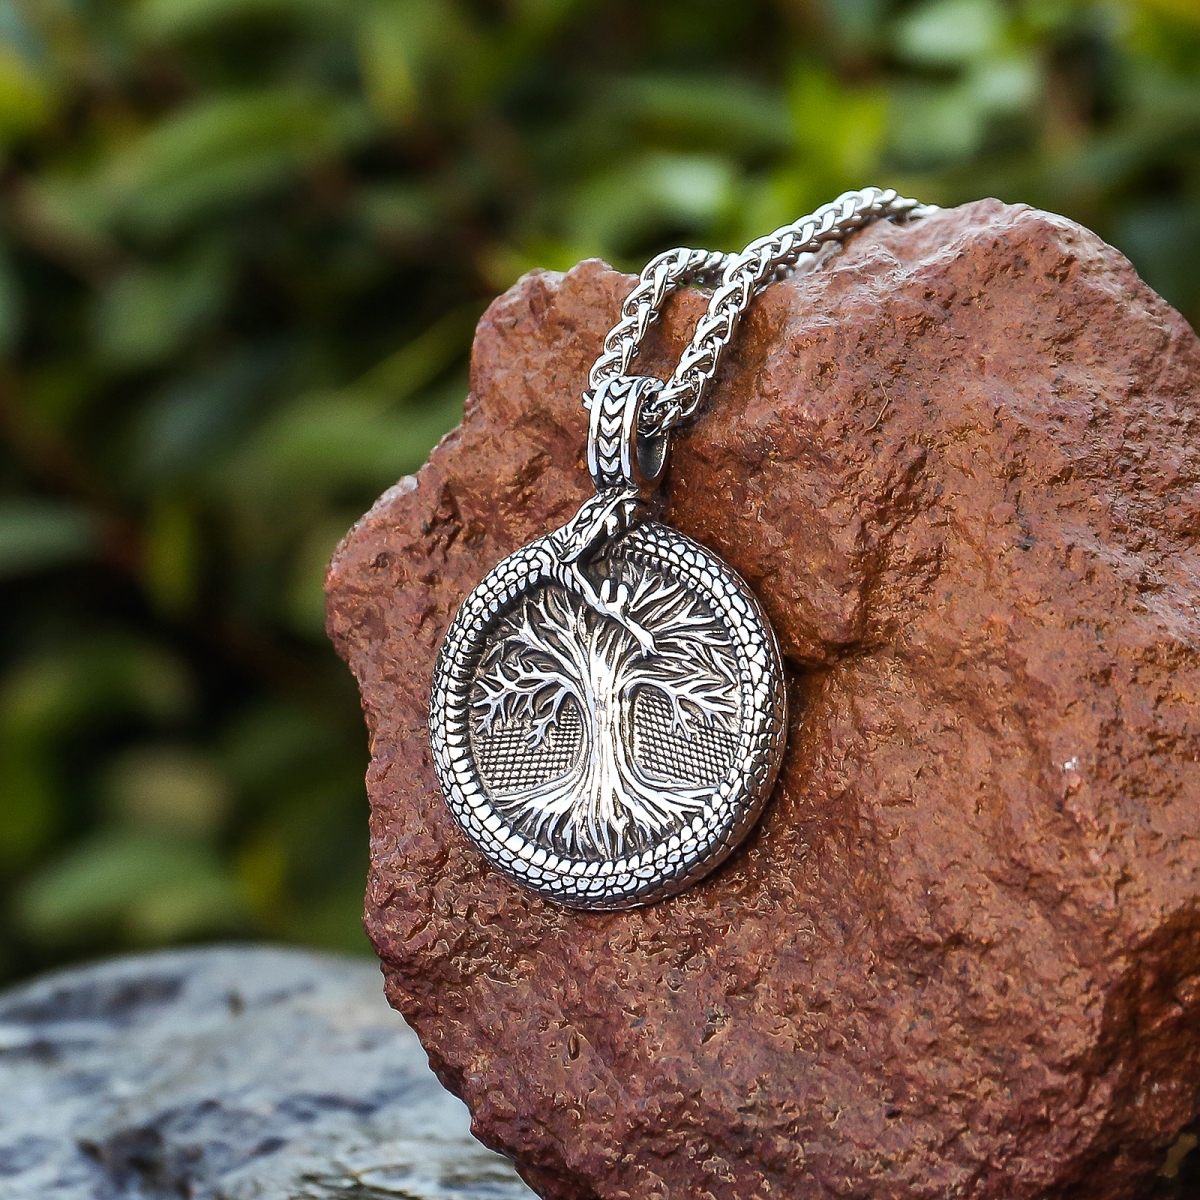 Yggdrasil Tree Necklace US$3.2/PC-NORSECOLLECTION- Viking Jewelry,Viking Necklace,Viking Bracelet,Viking Rings,Viking Mugs,Viking Accessories,Viking Crafts